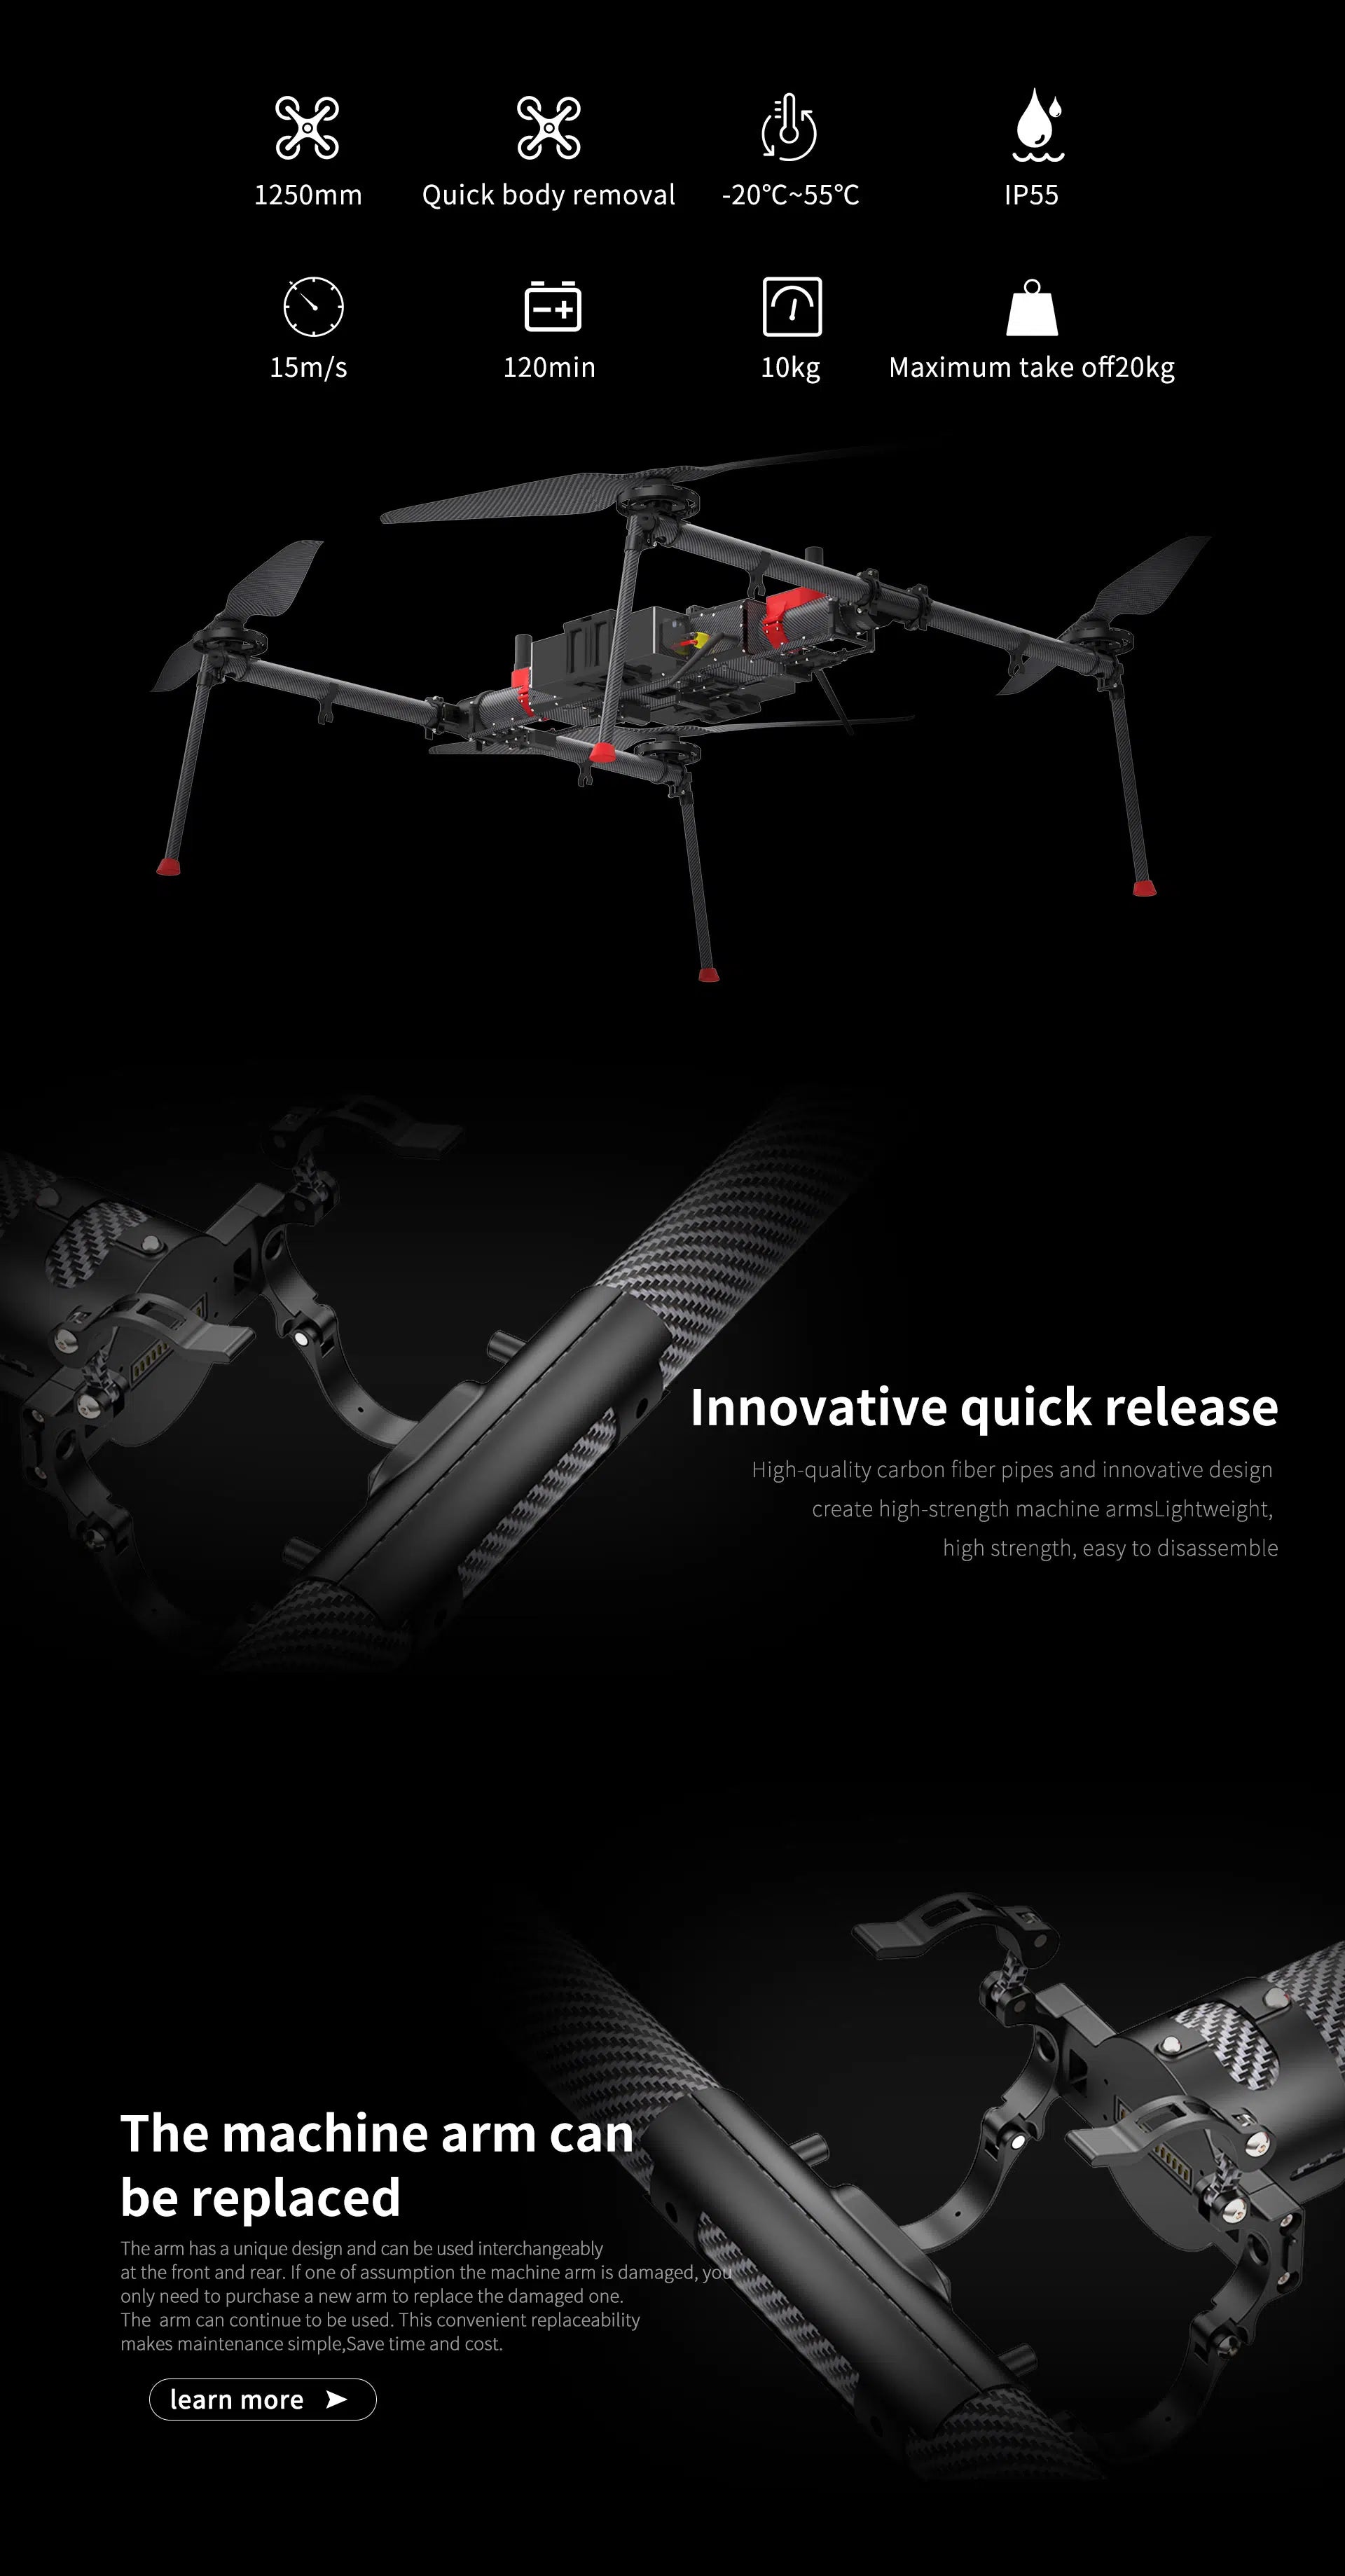 Keel Quadcopter Delivery Drone, the arm has a unique design and can be used interchangeably at the front and rear 